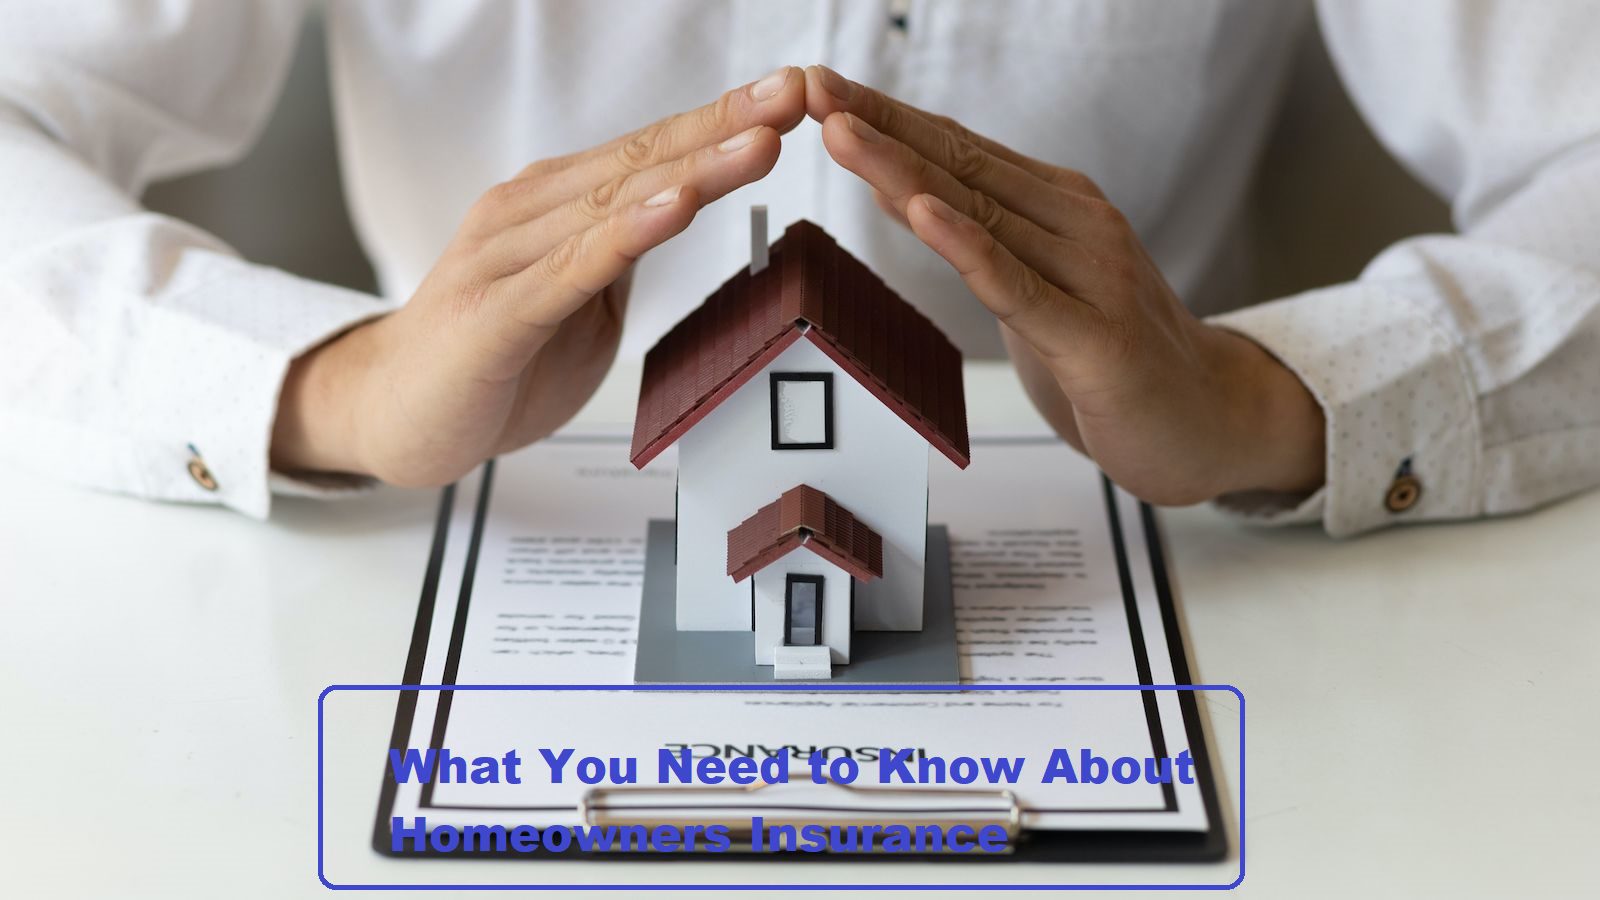 What You Need to Know About Homeowners Insurance